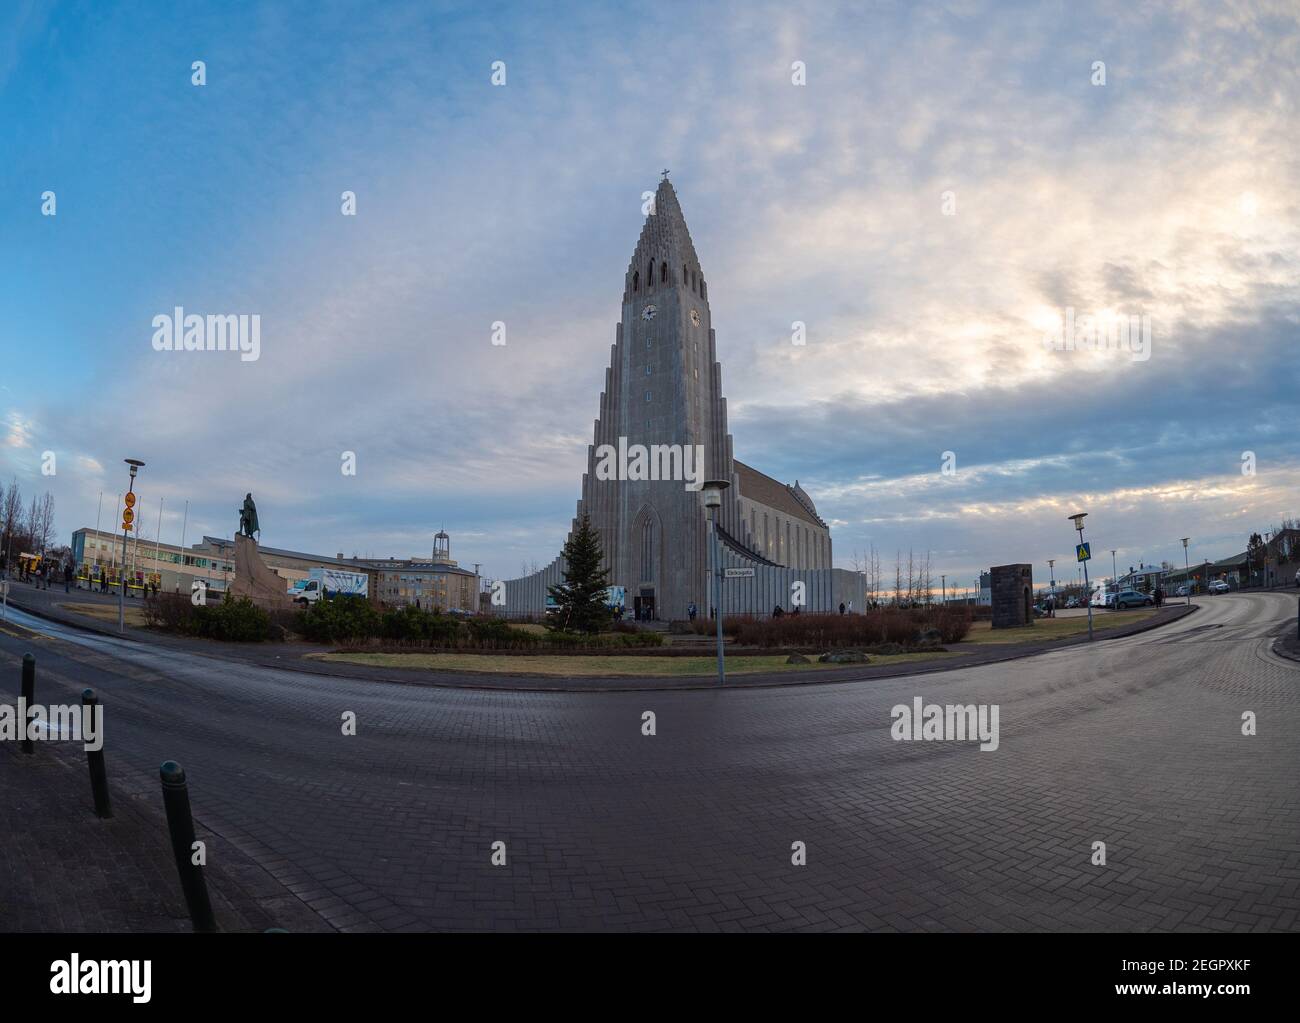 Reykjavik, Iceland - December 5, 2017 - Hallgrimskirkja Cathedral and street view, nice cloud formation on the background Stock Photo